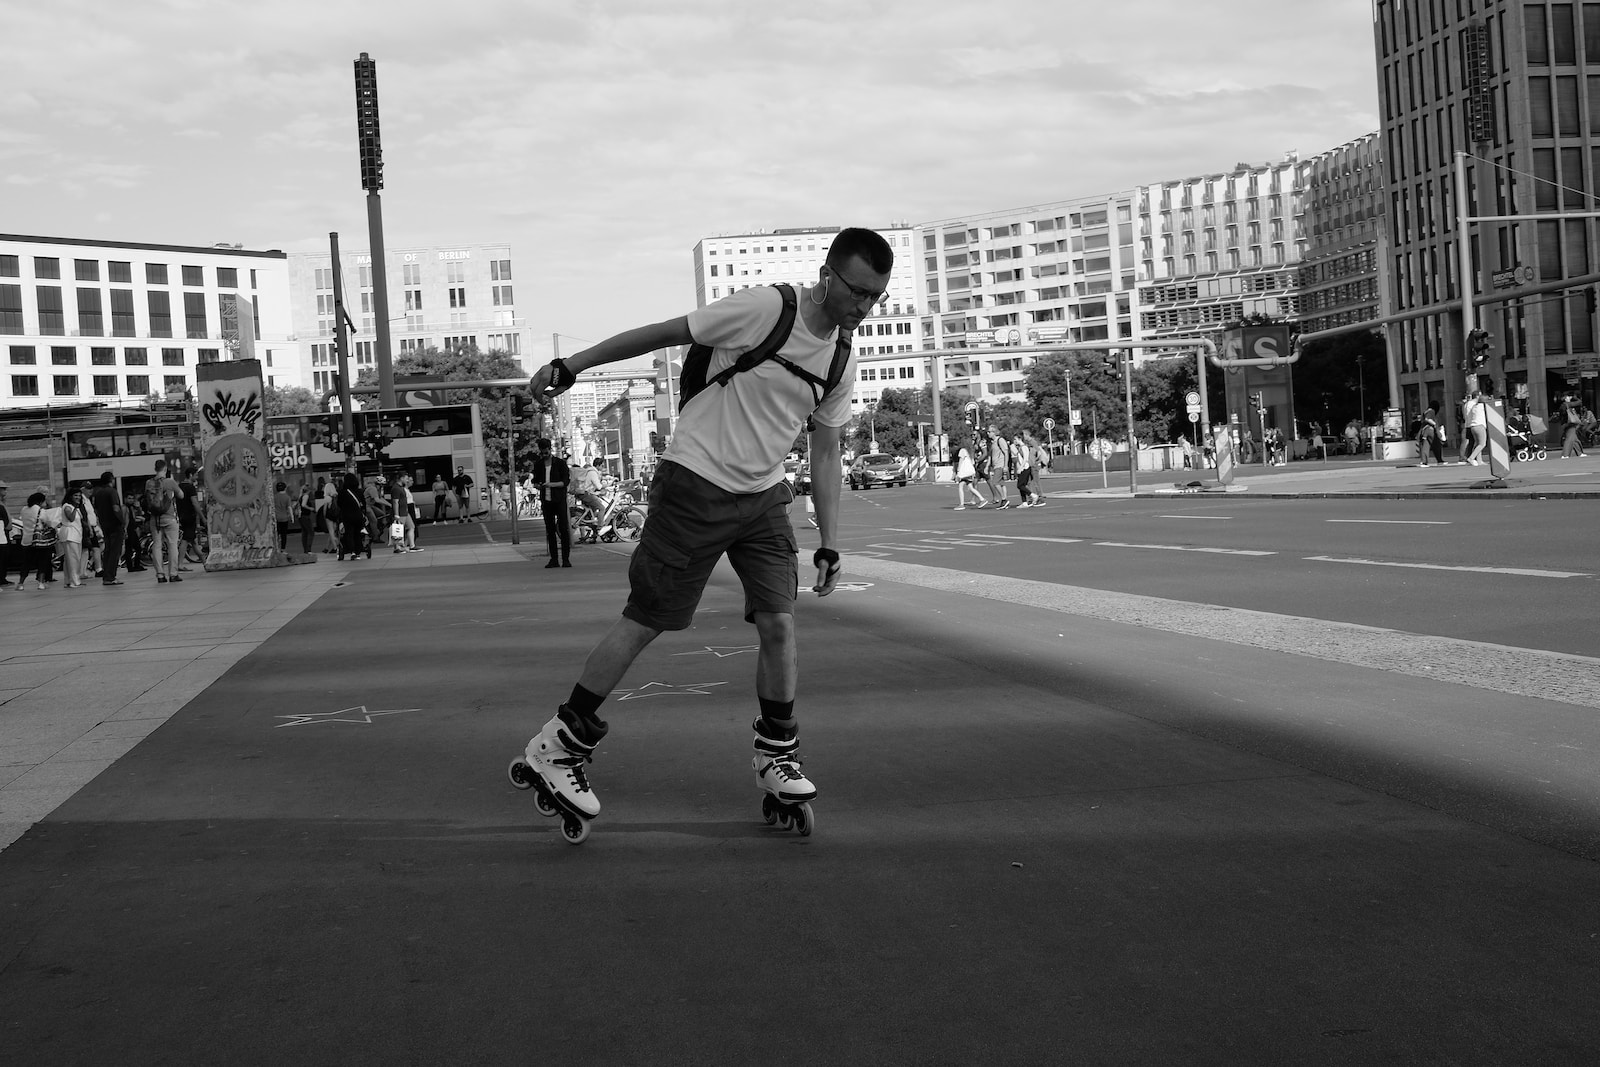 grayscale photography of man riding inline skate